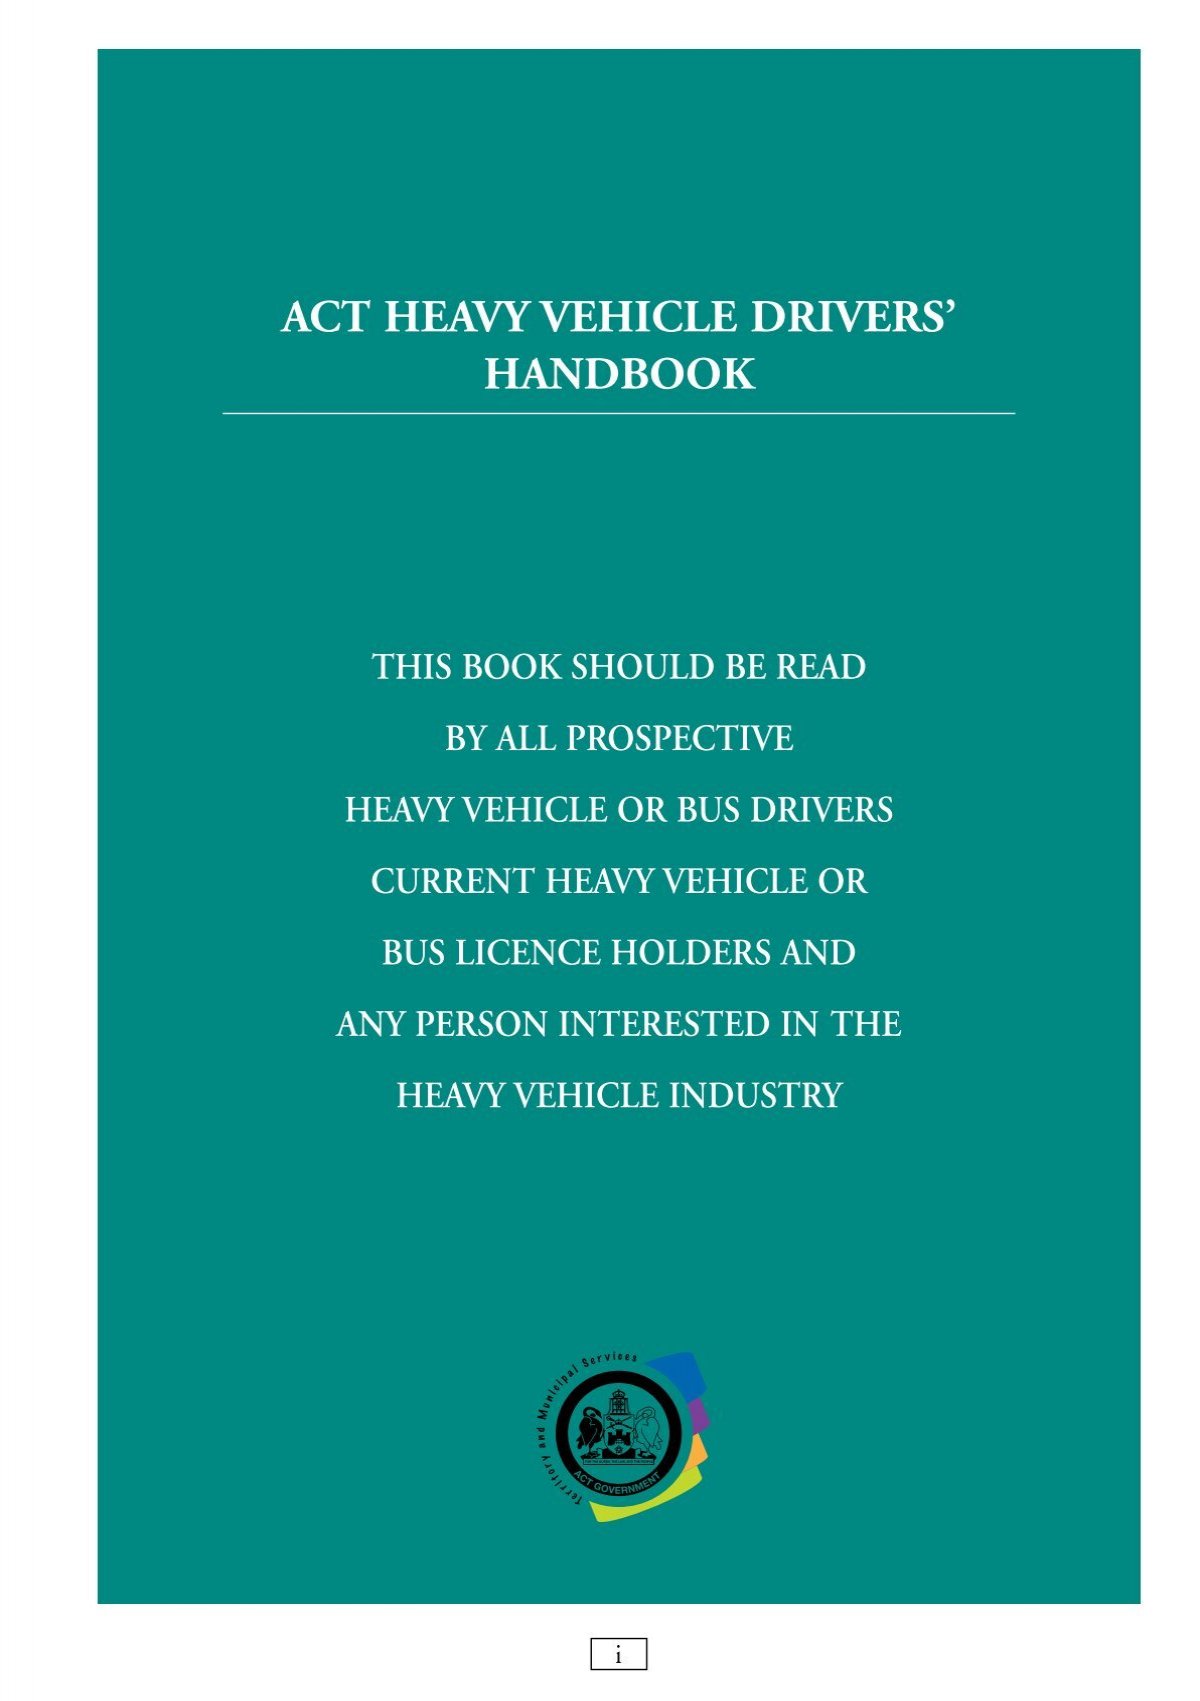 Heavy Vehicle Drivers Handbook 2008 - Rego ACT - ACT Government